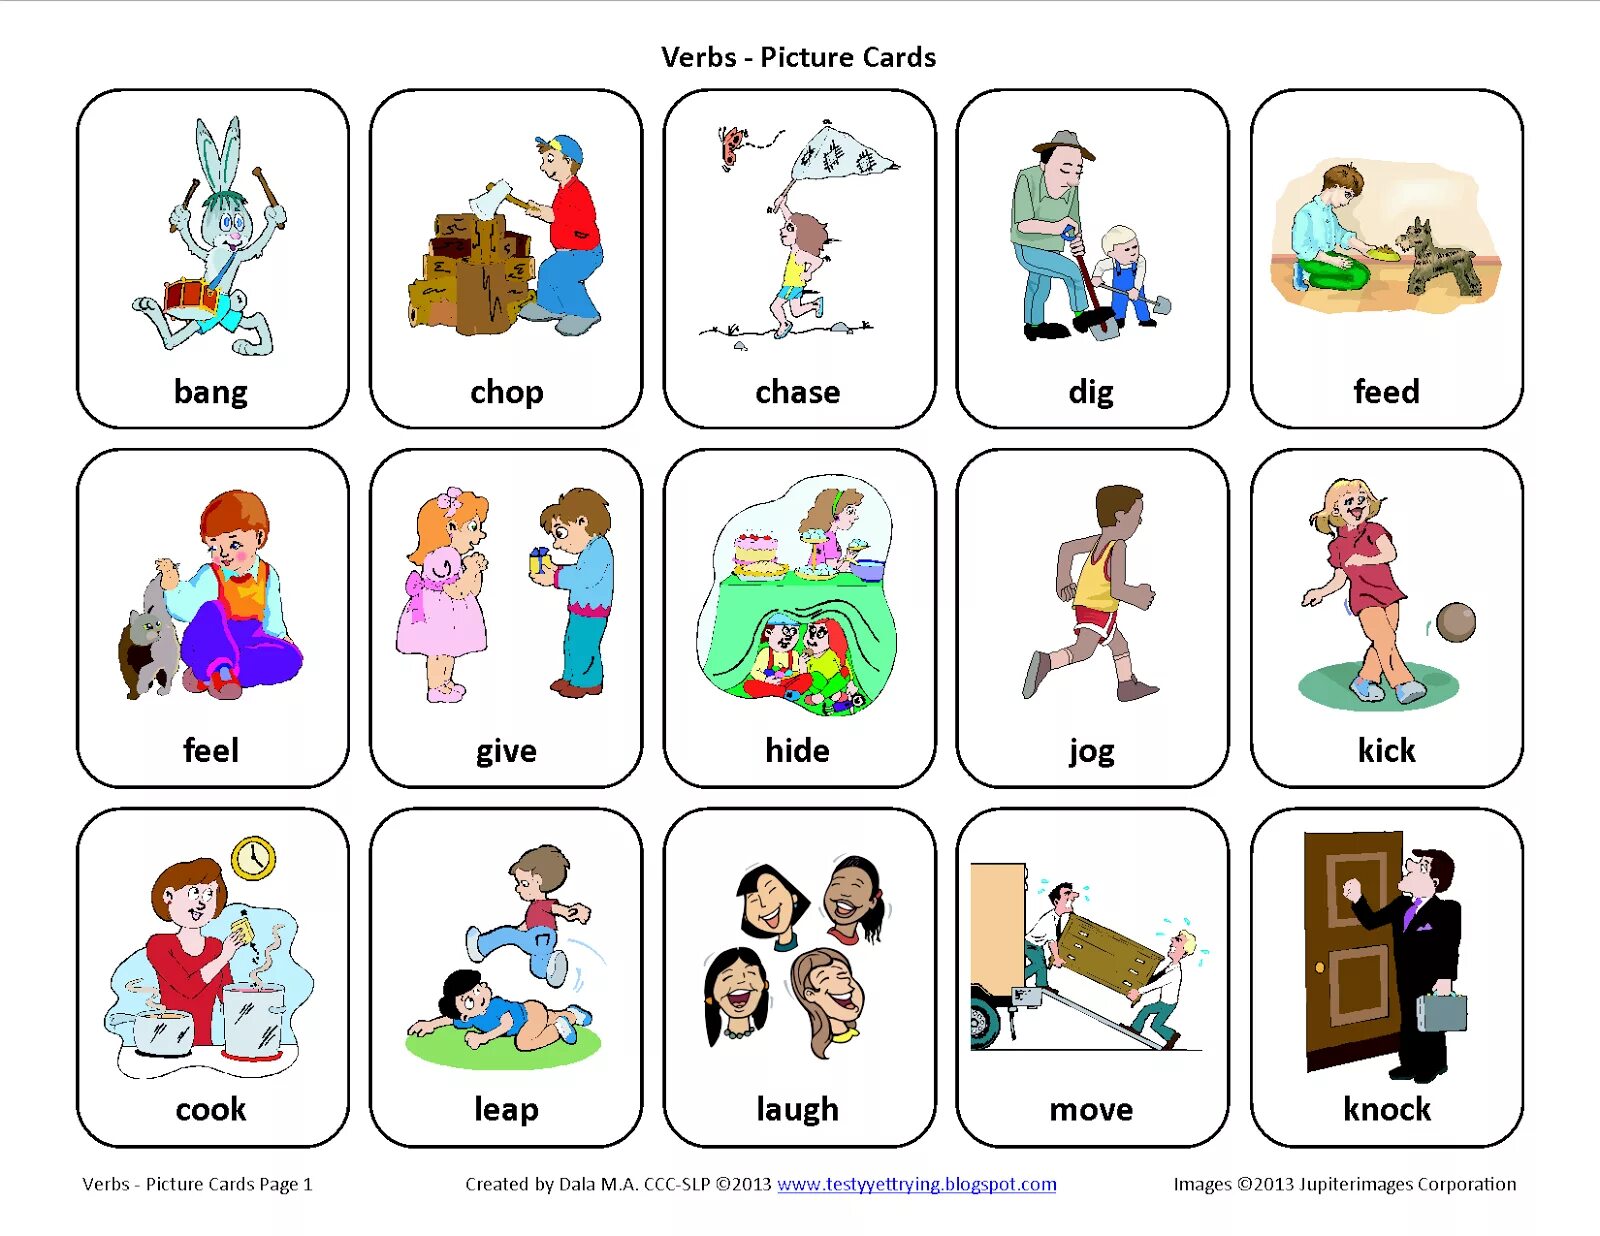 Would like to take out. Action verbs в английском. Карточки Actions английский. Карточки на английском для детей. Карточки с действиями на английском.